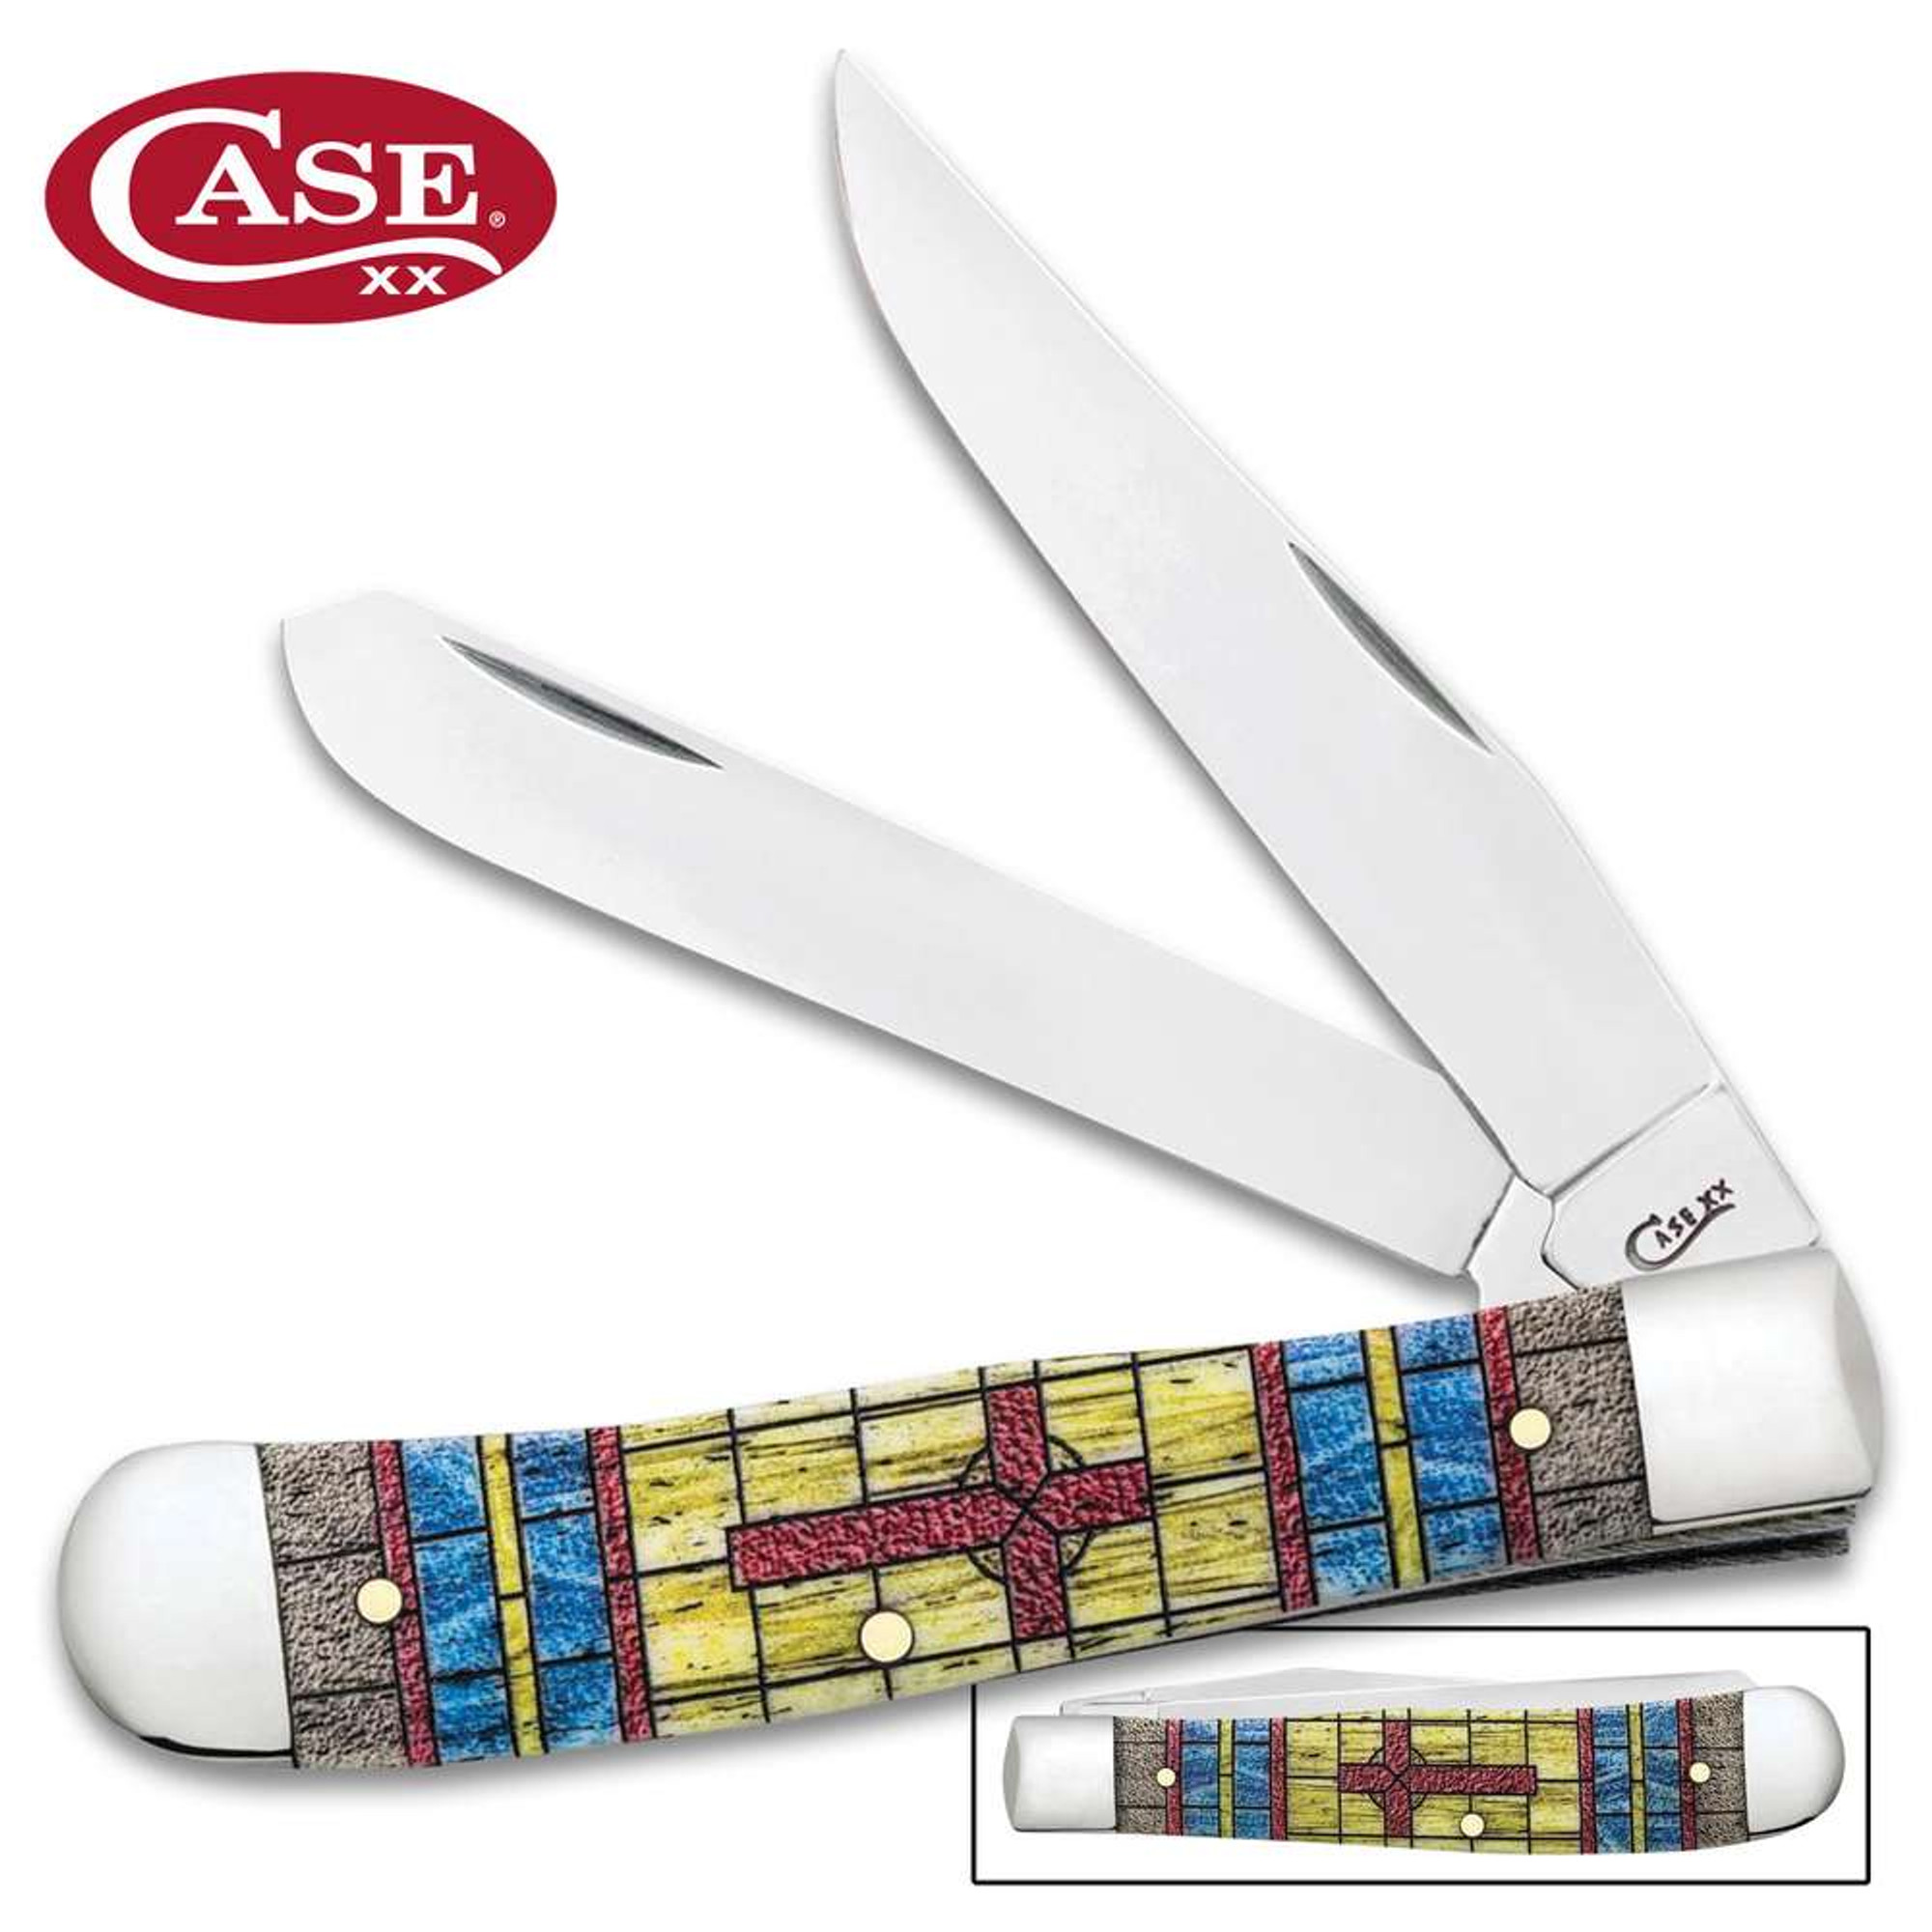 Case Stained Glass Cross Trapper Pocket Knife Gift Set